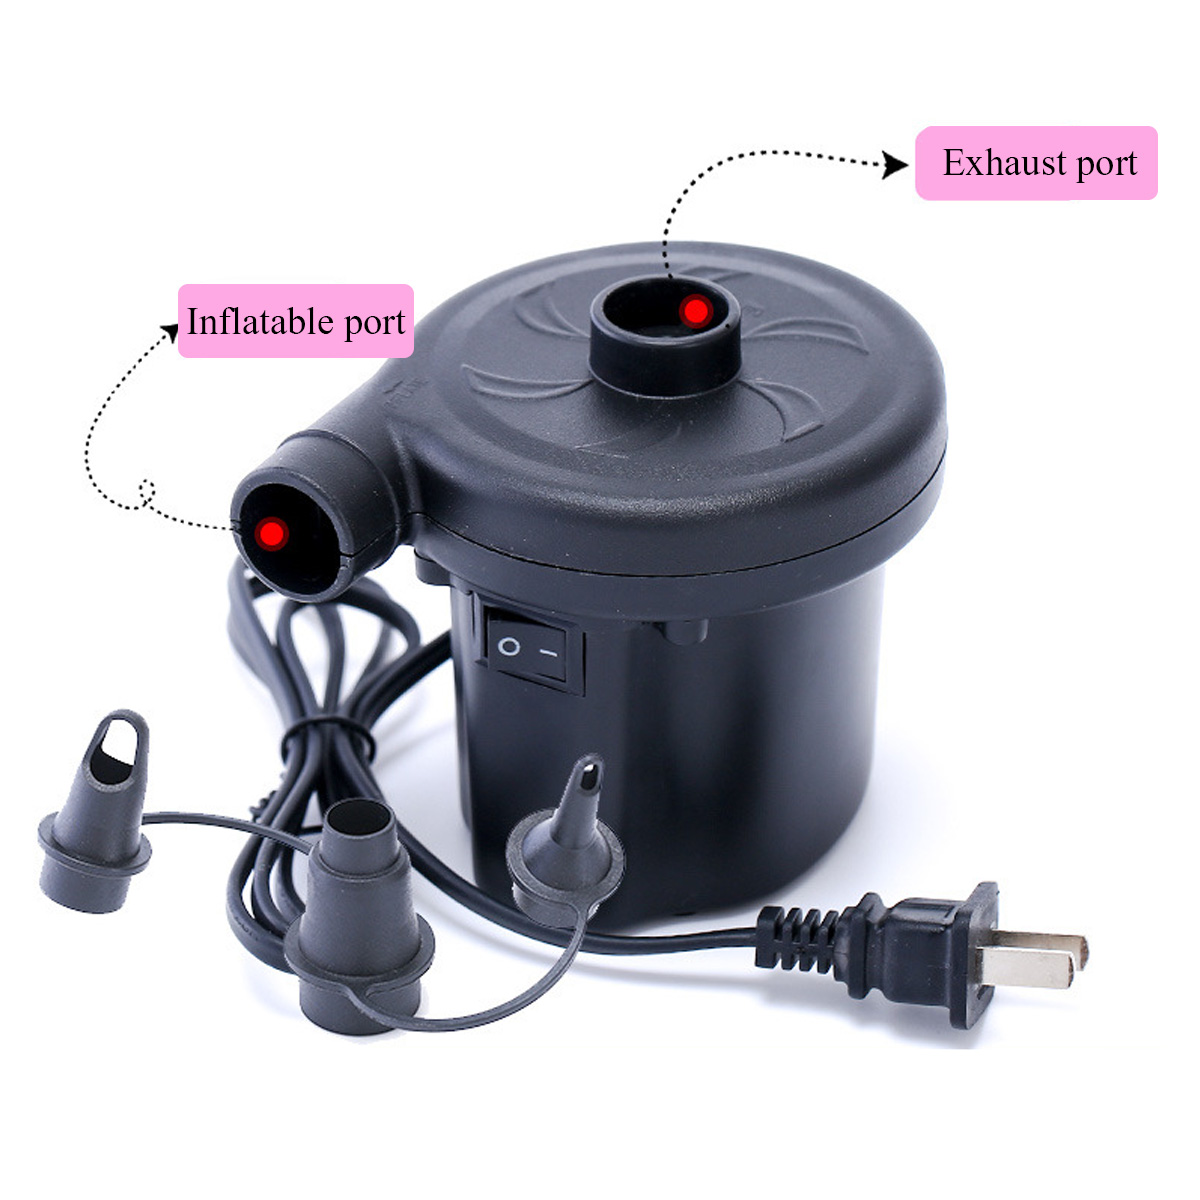 Multifunction-Electric-Air-Pump-Fast-Inflator-Deflator-for-Swimming-Ring-Air-Mattress-Inflatable-Cus-1707439-2